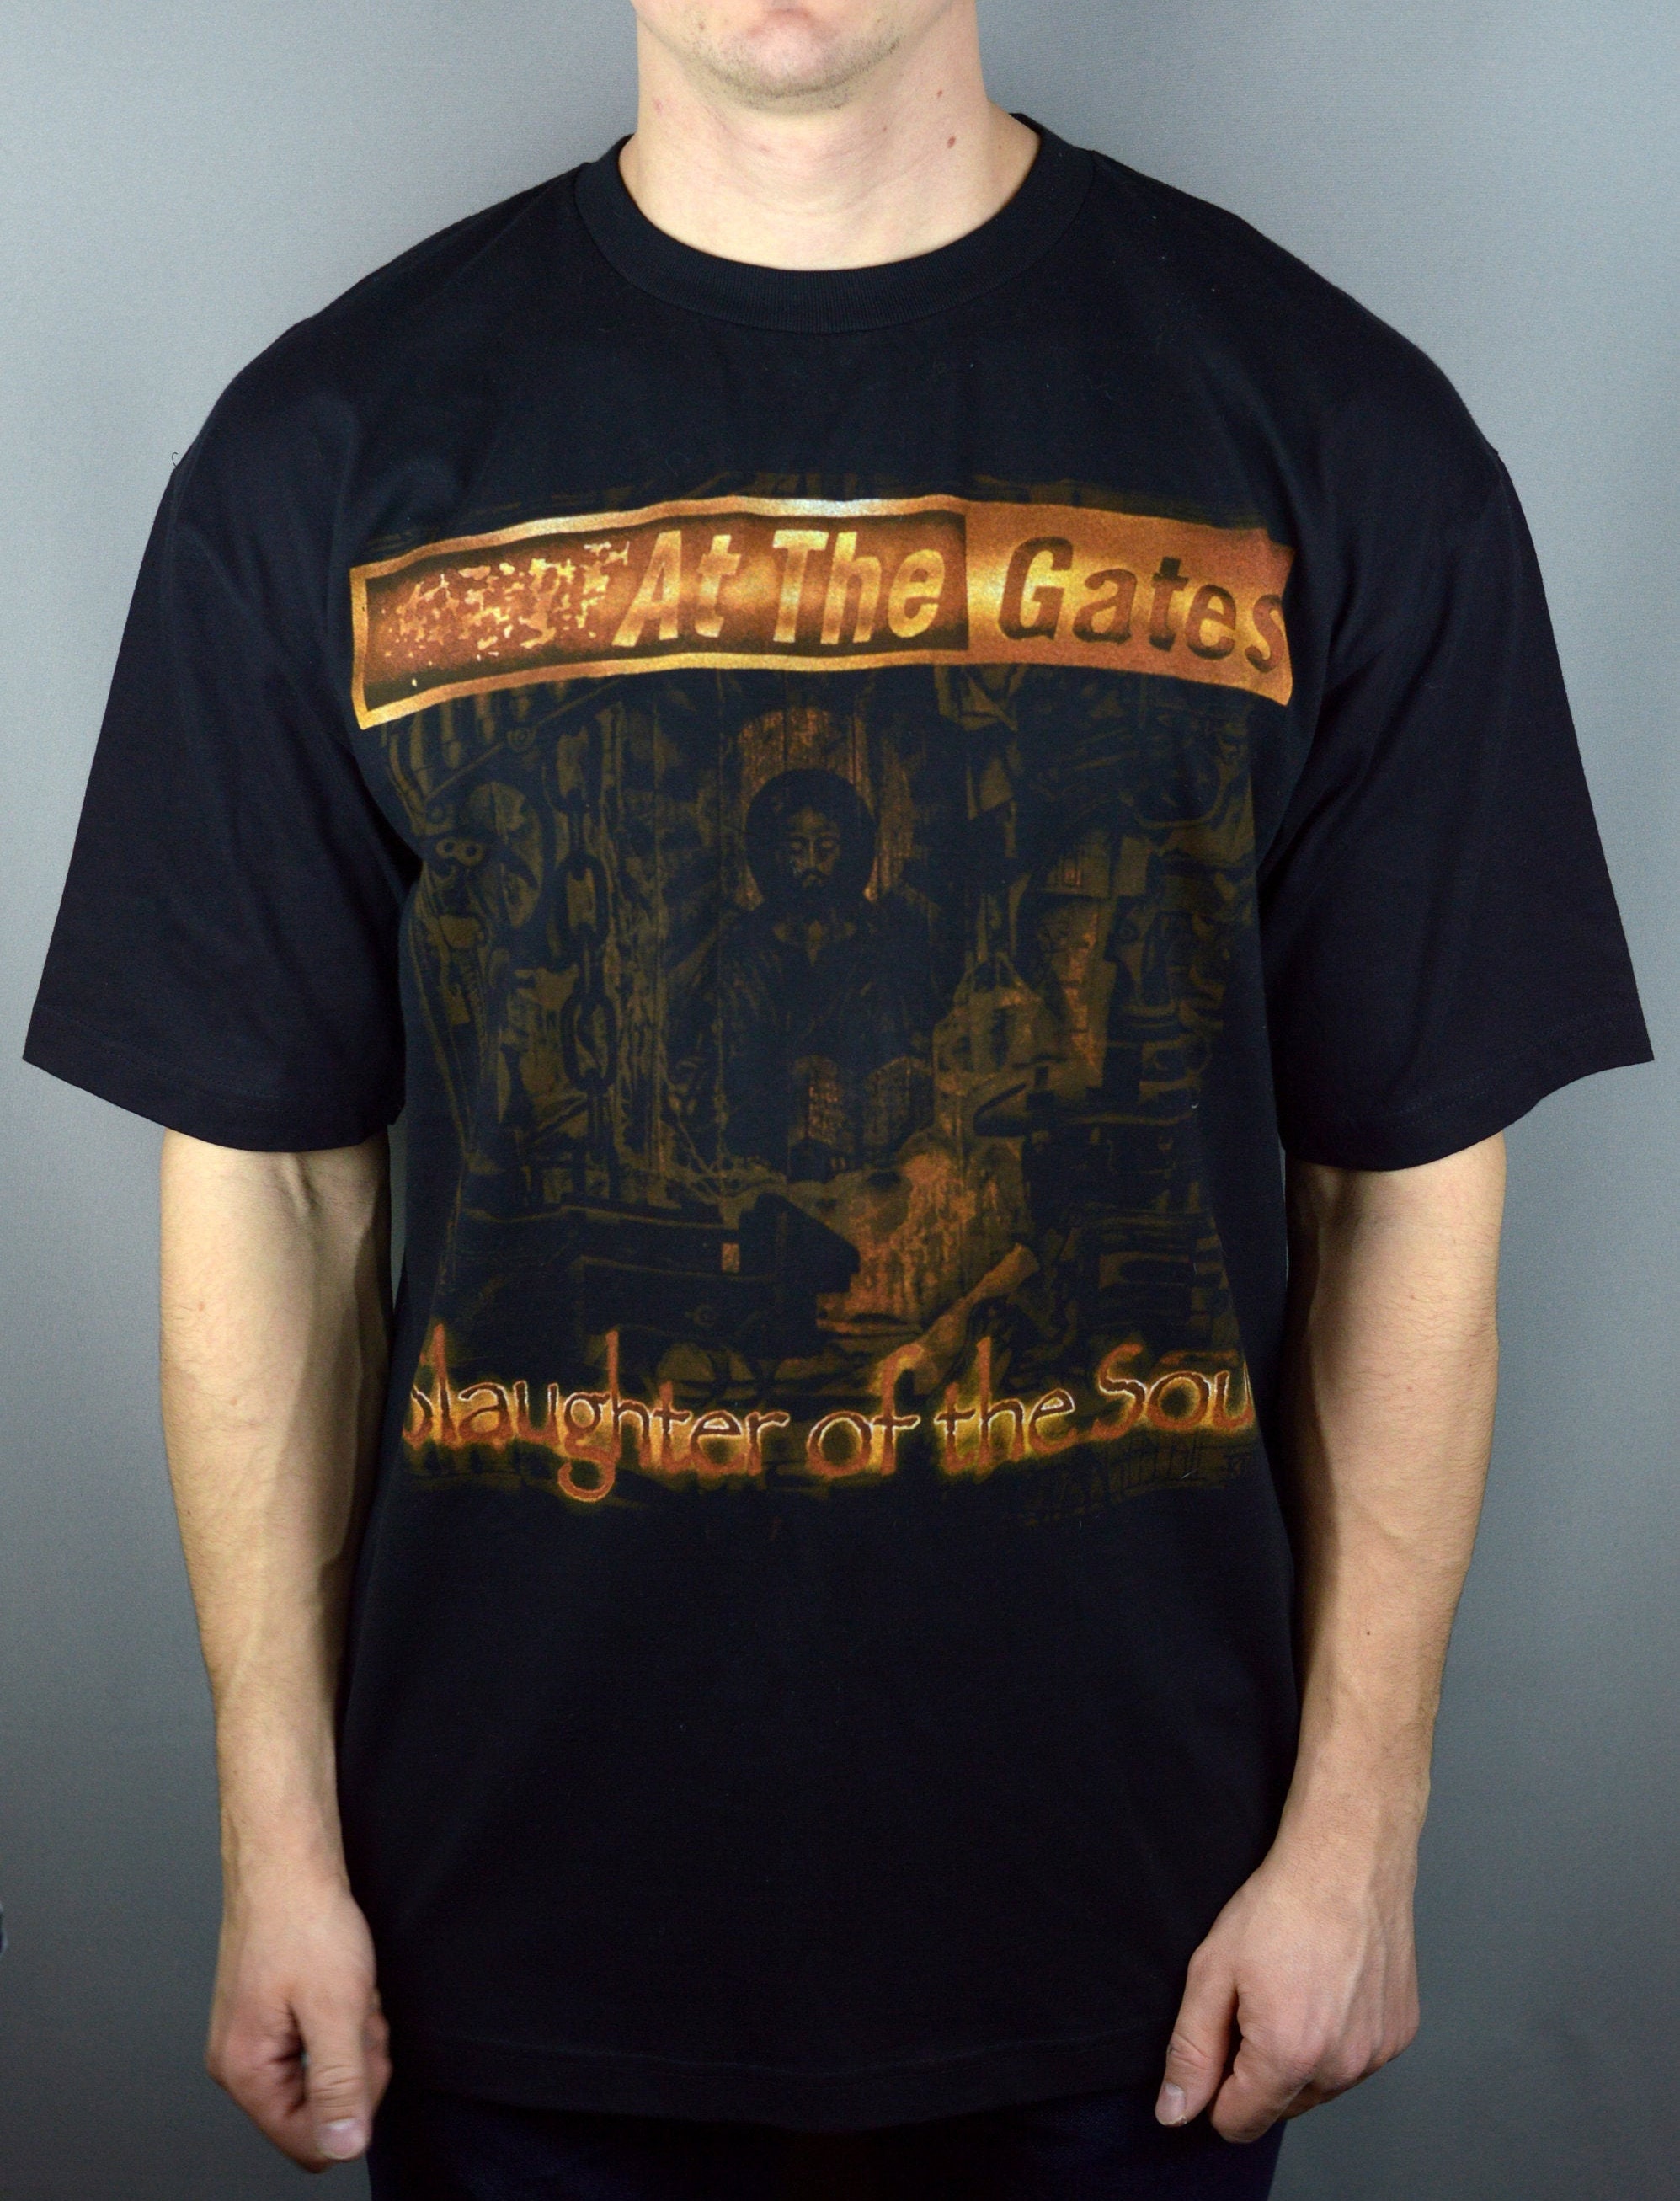 Vintage 90s At The Gates Slaughter Of The Soul t shirt - Etsy 日本